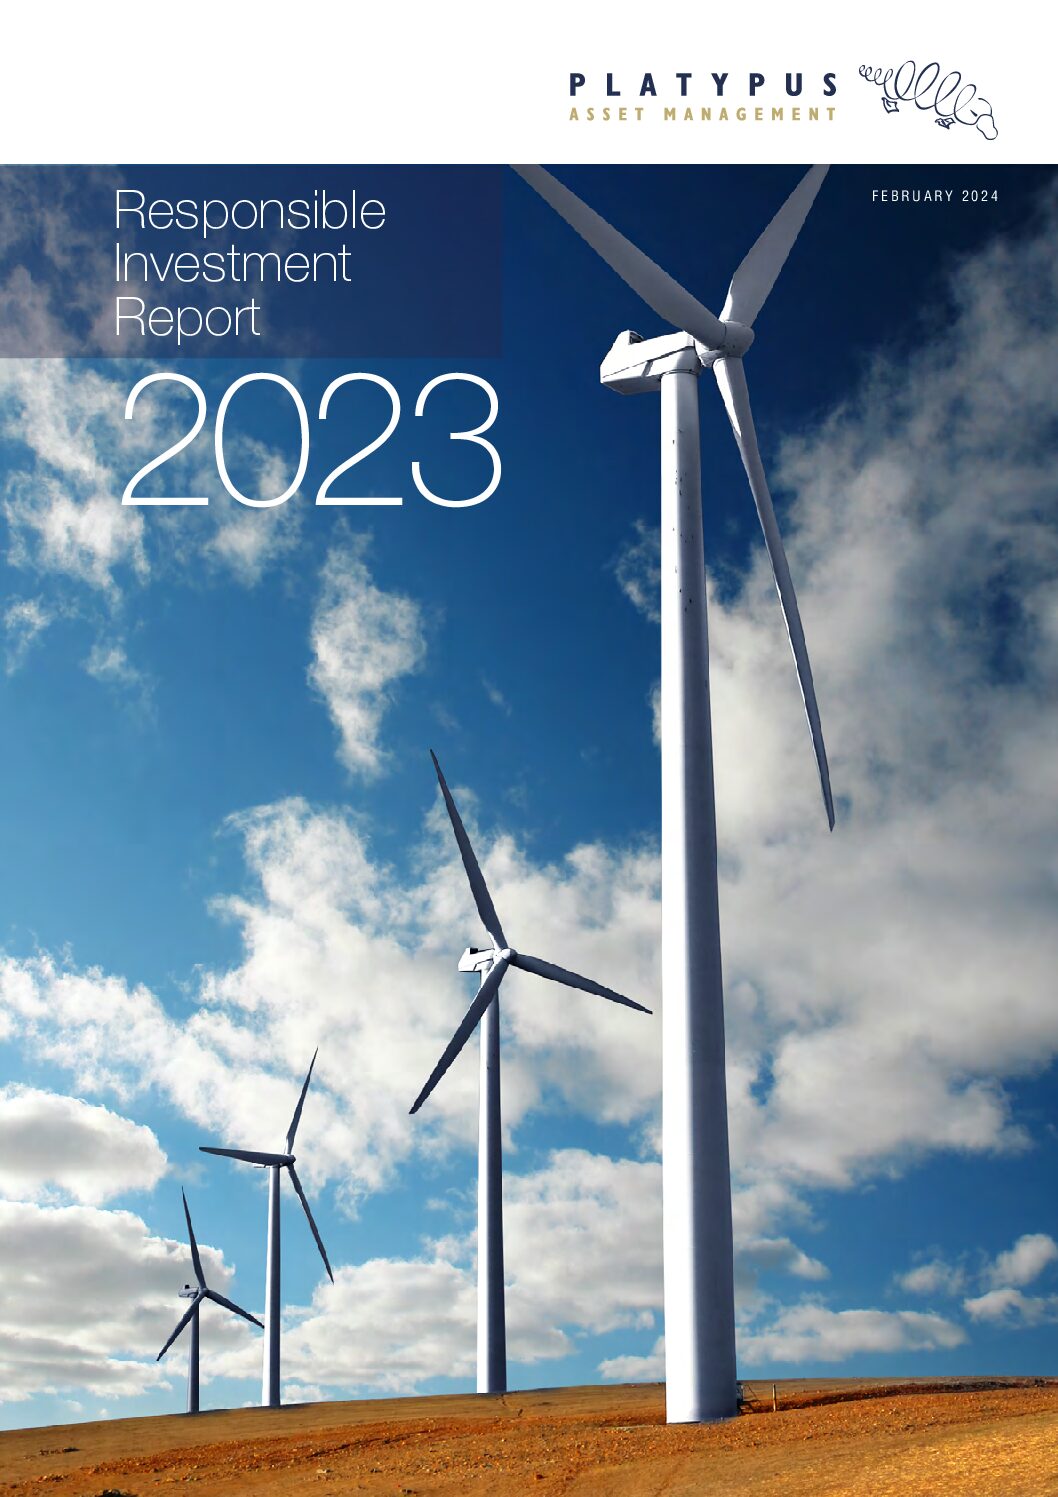 The Platypus Asset Management 2023 Responsible Investment Report